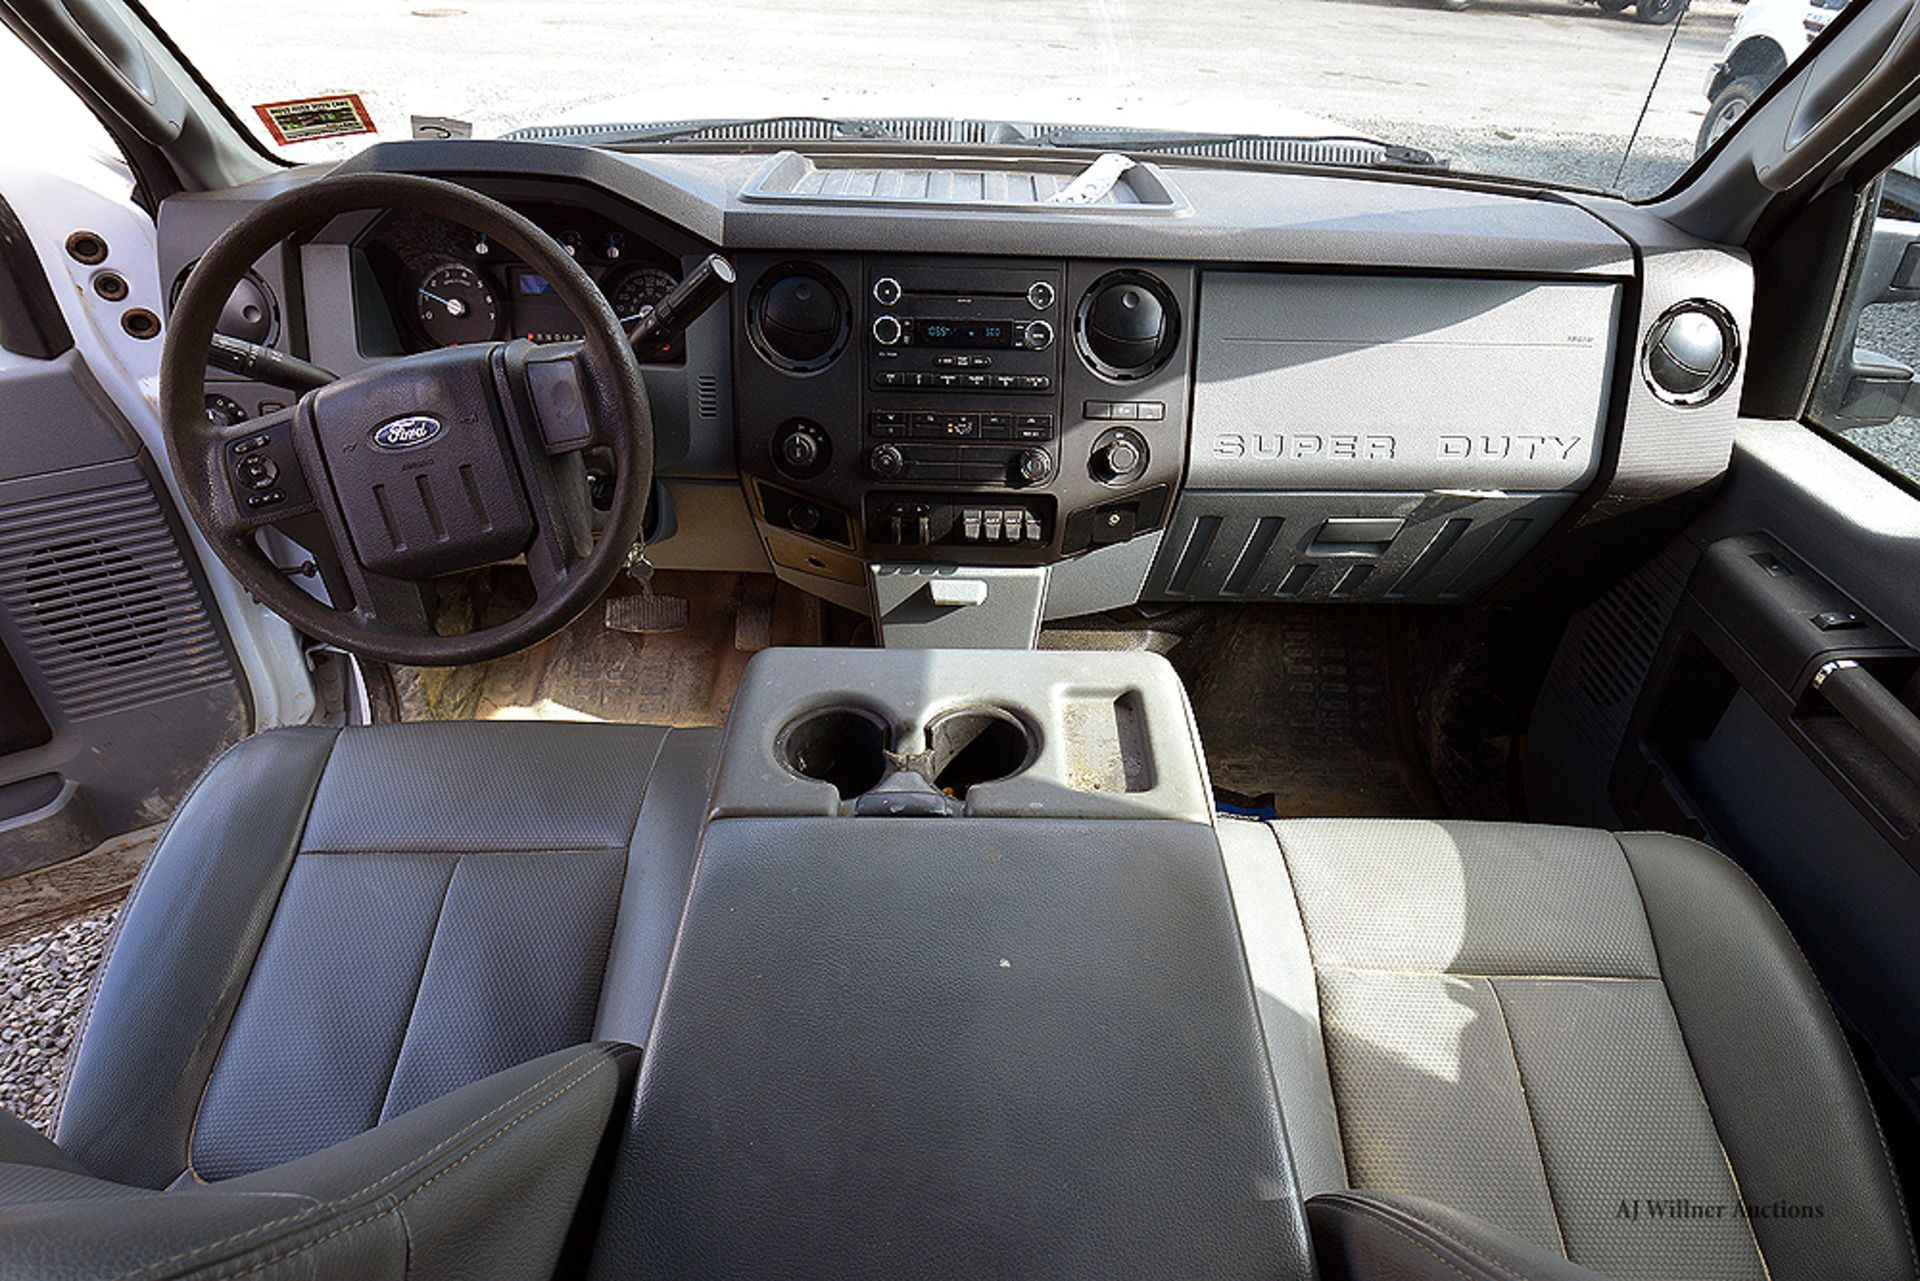 2012 Ford F-250 Super Duty Super Cab Utility Truck 92,764 Miles w/ Auto Trans and 6.2L V8 - Image 5 of 7